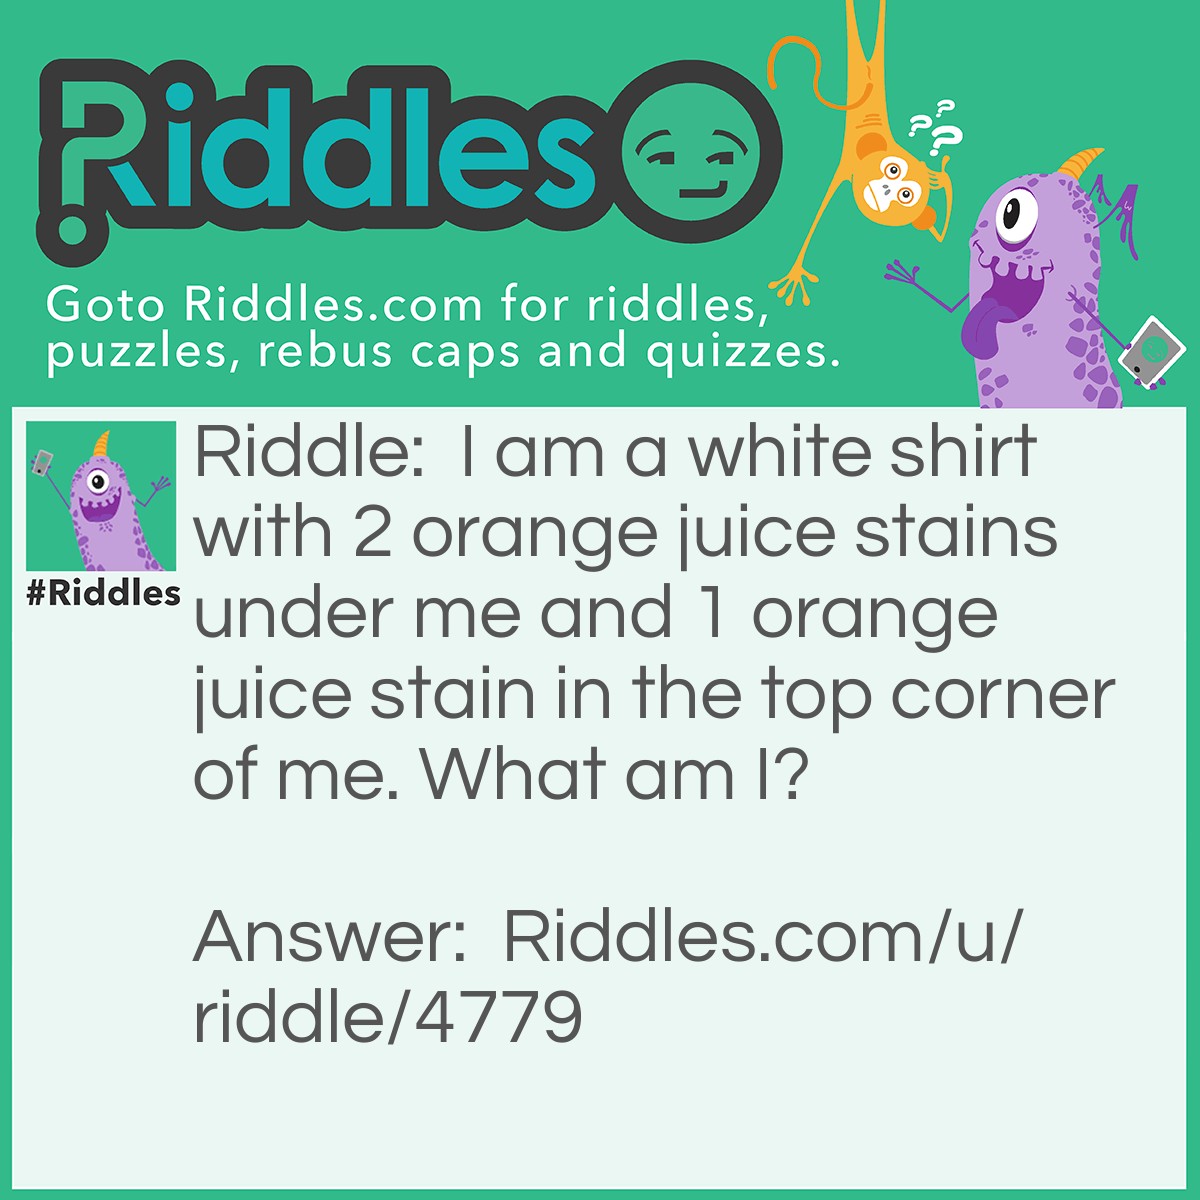 Riddle: I am a white shirt with 2 orange juice stains under me and 1 orange juice stain in the top corner of me. What am I? Answer: A duck.